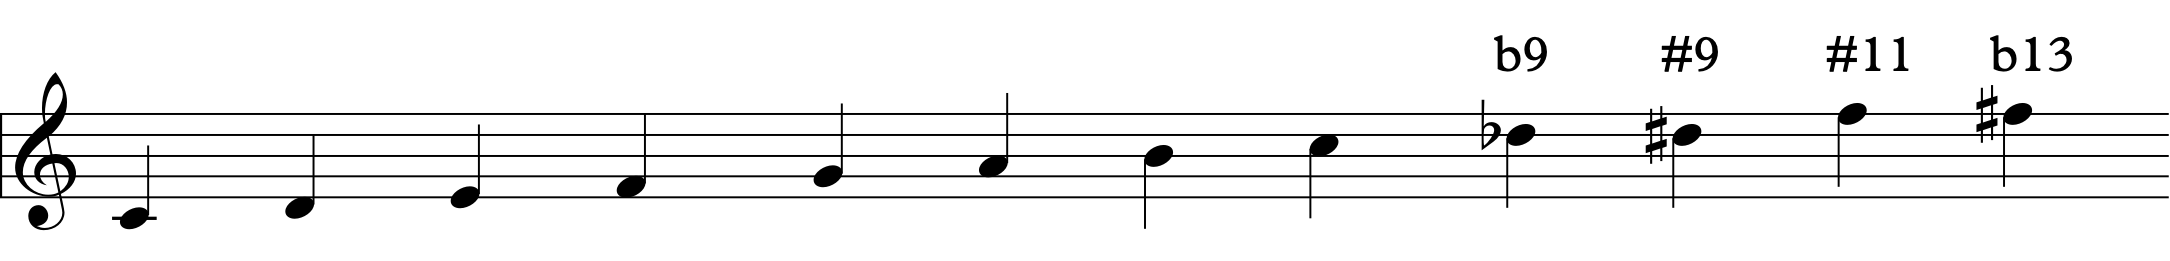 The four alterations. Learn jazz piano online to improve your solos with these altered notes.